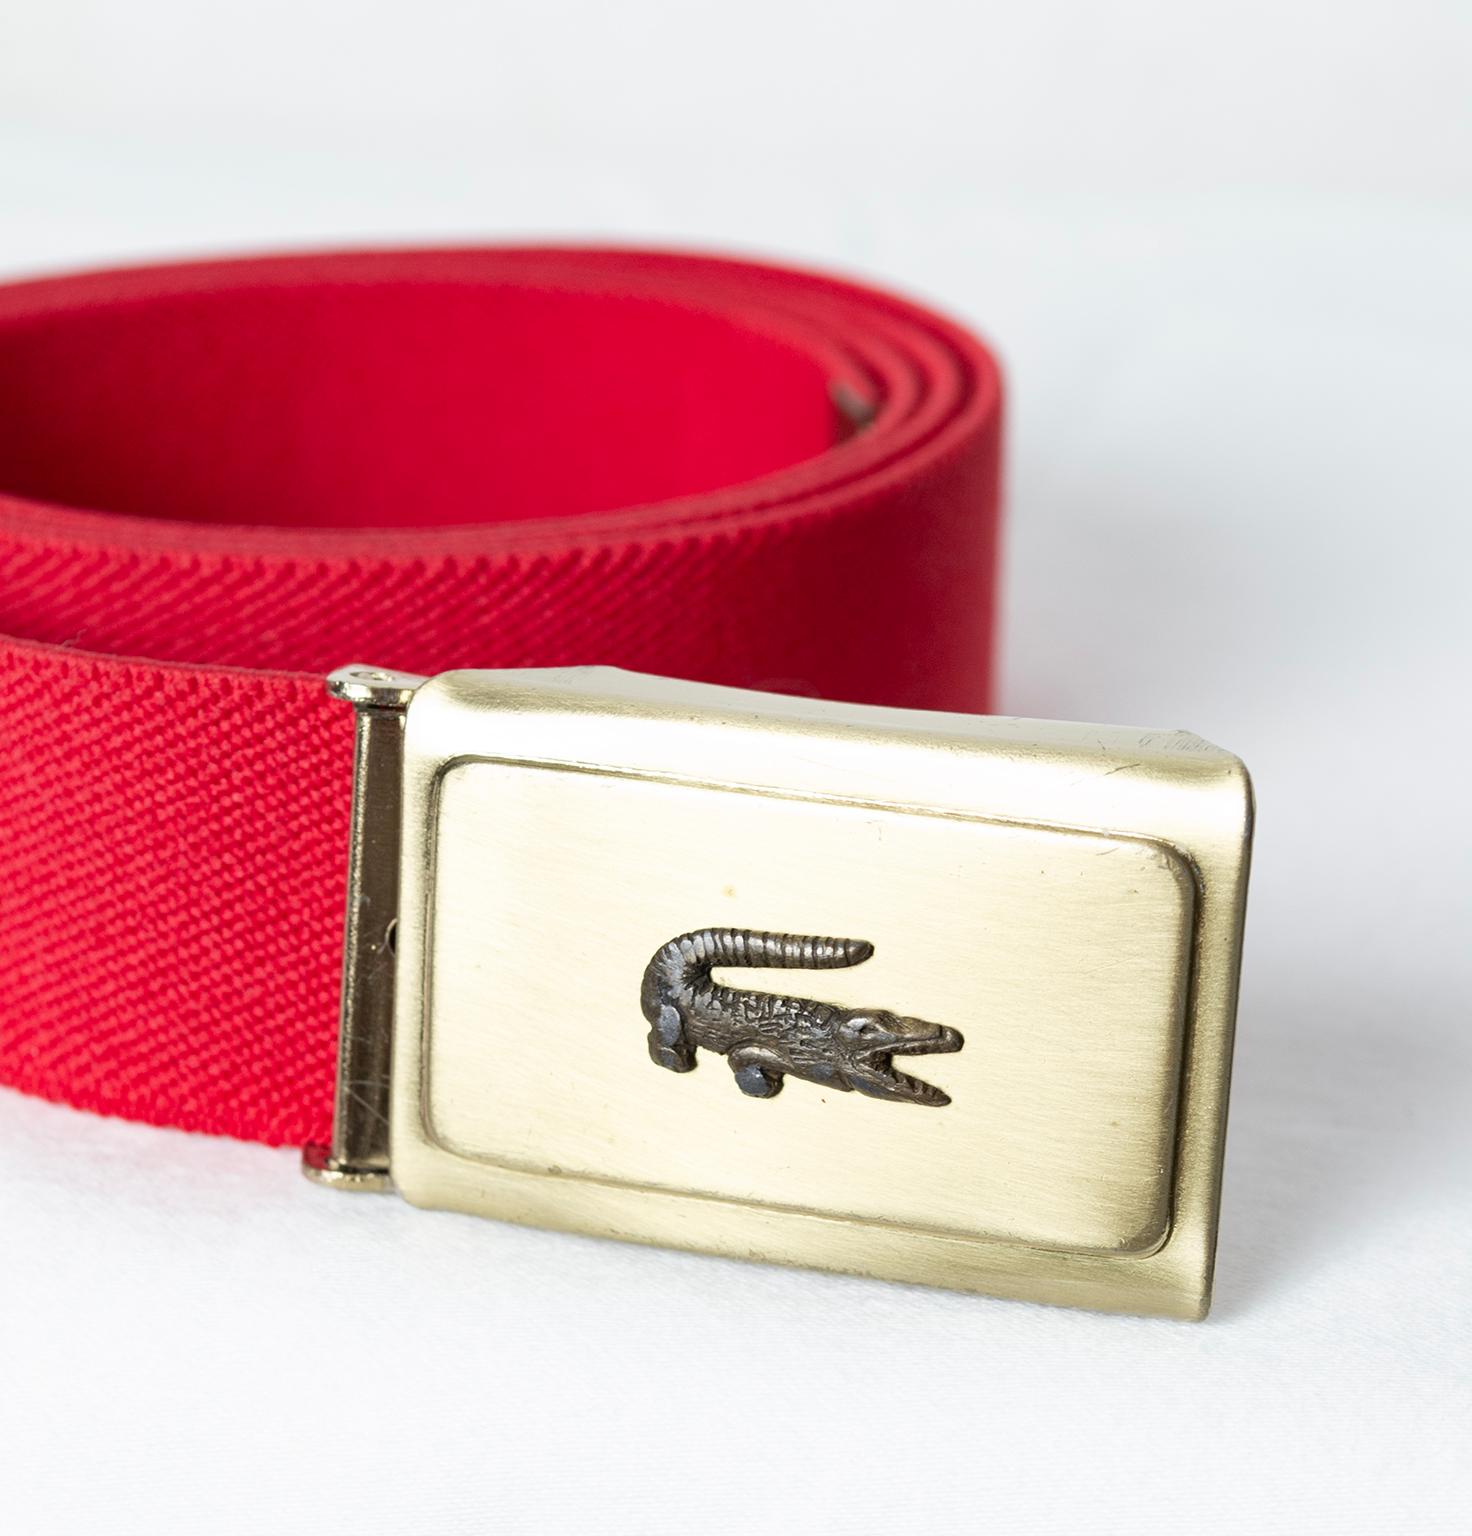 Mint and unworn, this iconic piece of Preppy history is as bright, stretchy and country club-ready as it was when it was made over half a century ago. In the perfect cherry shade of red: not too orange and not too blue.

Elastic fabric stretch belt